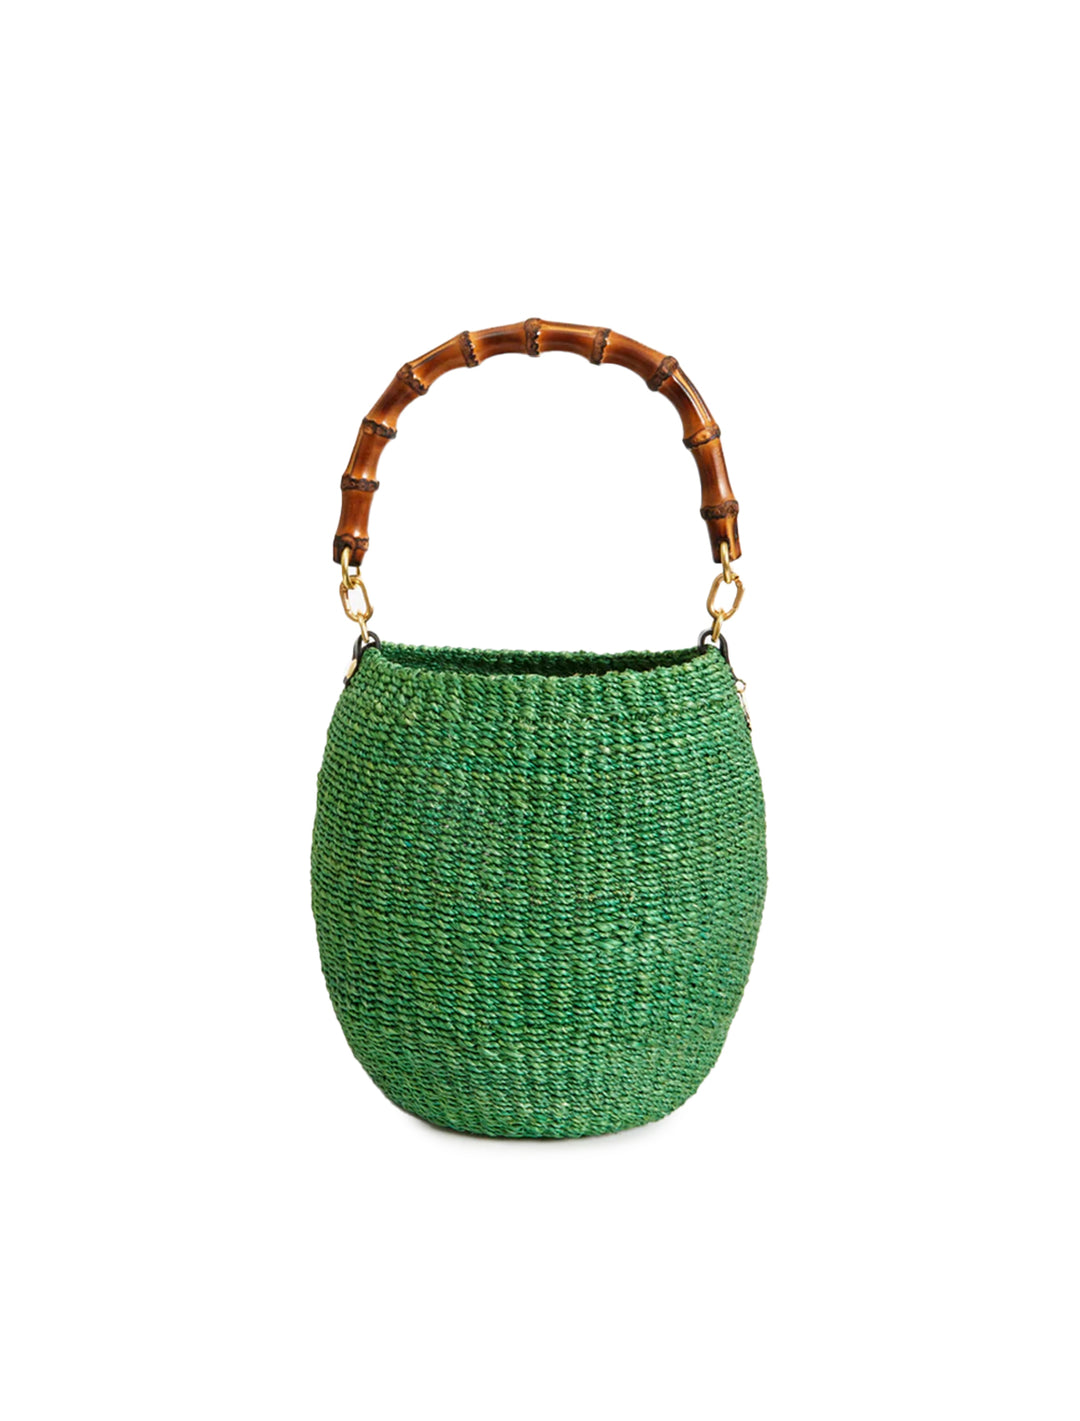 Front view of Clare V.'s pot de miel in green with bamboo handle.